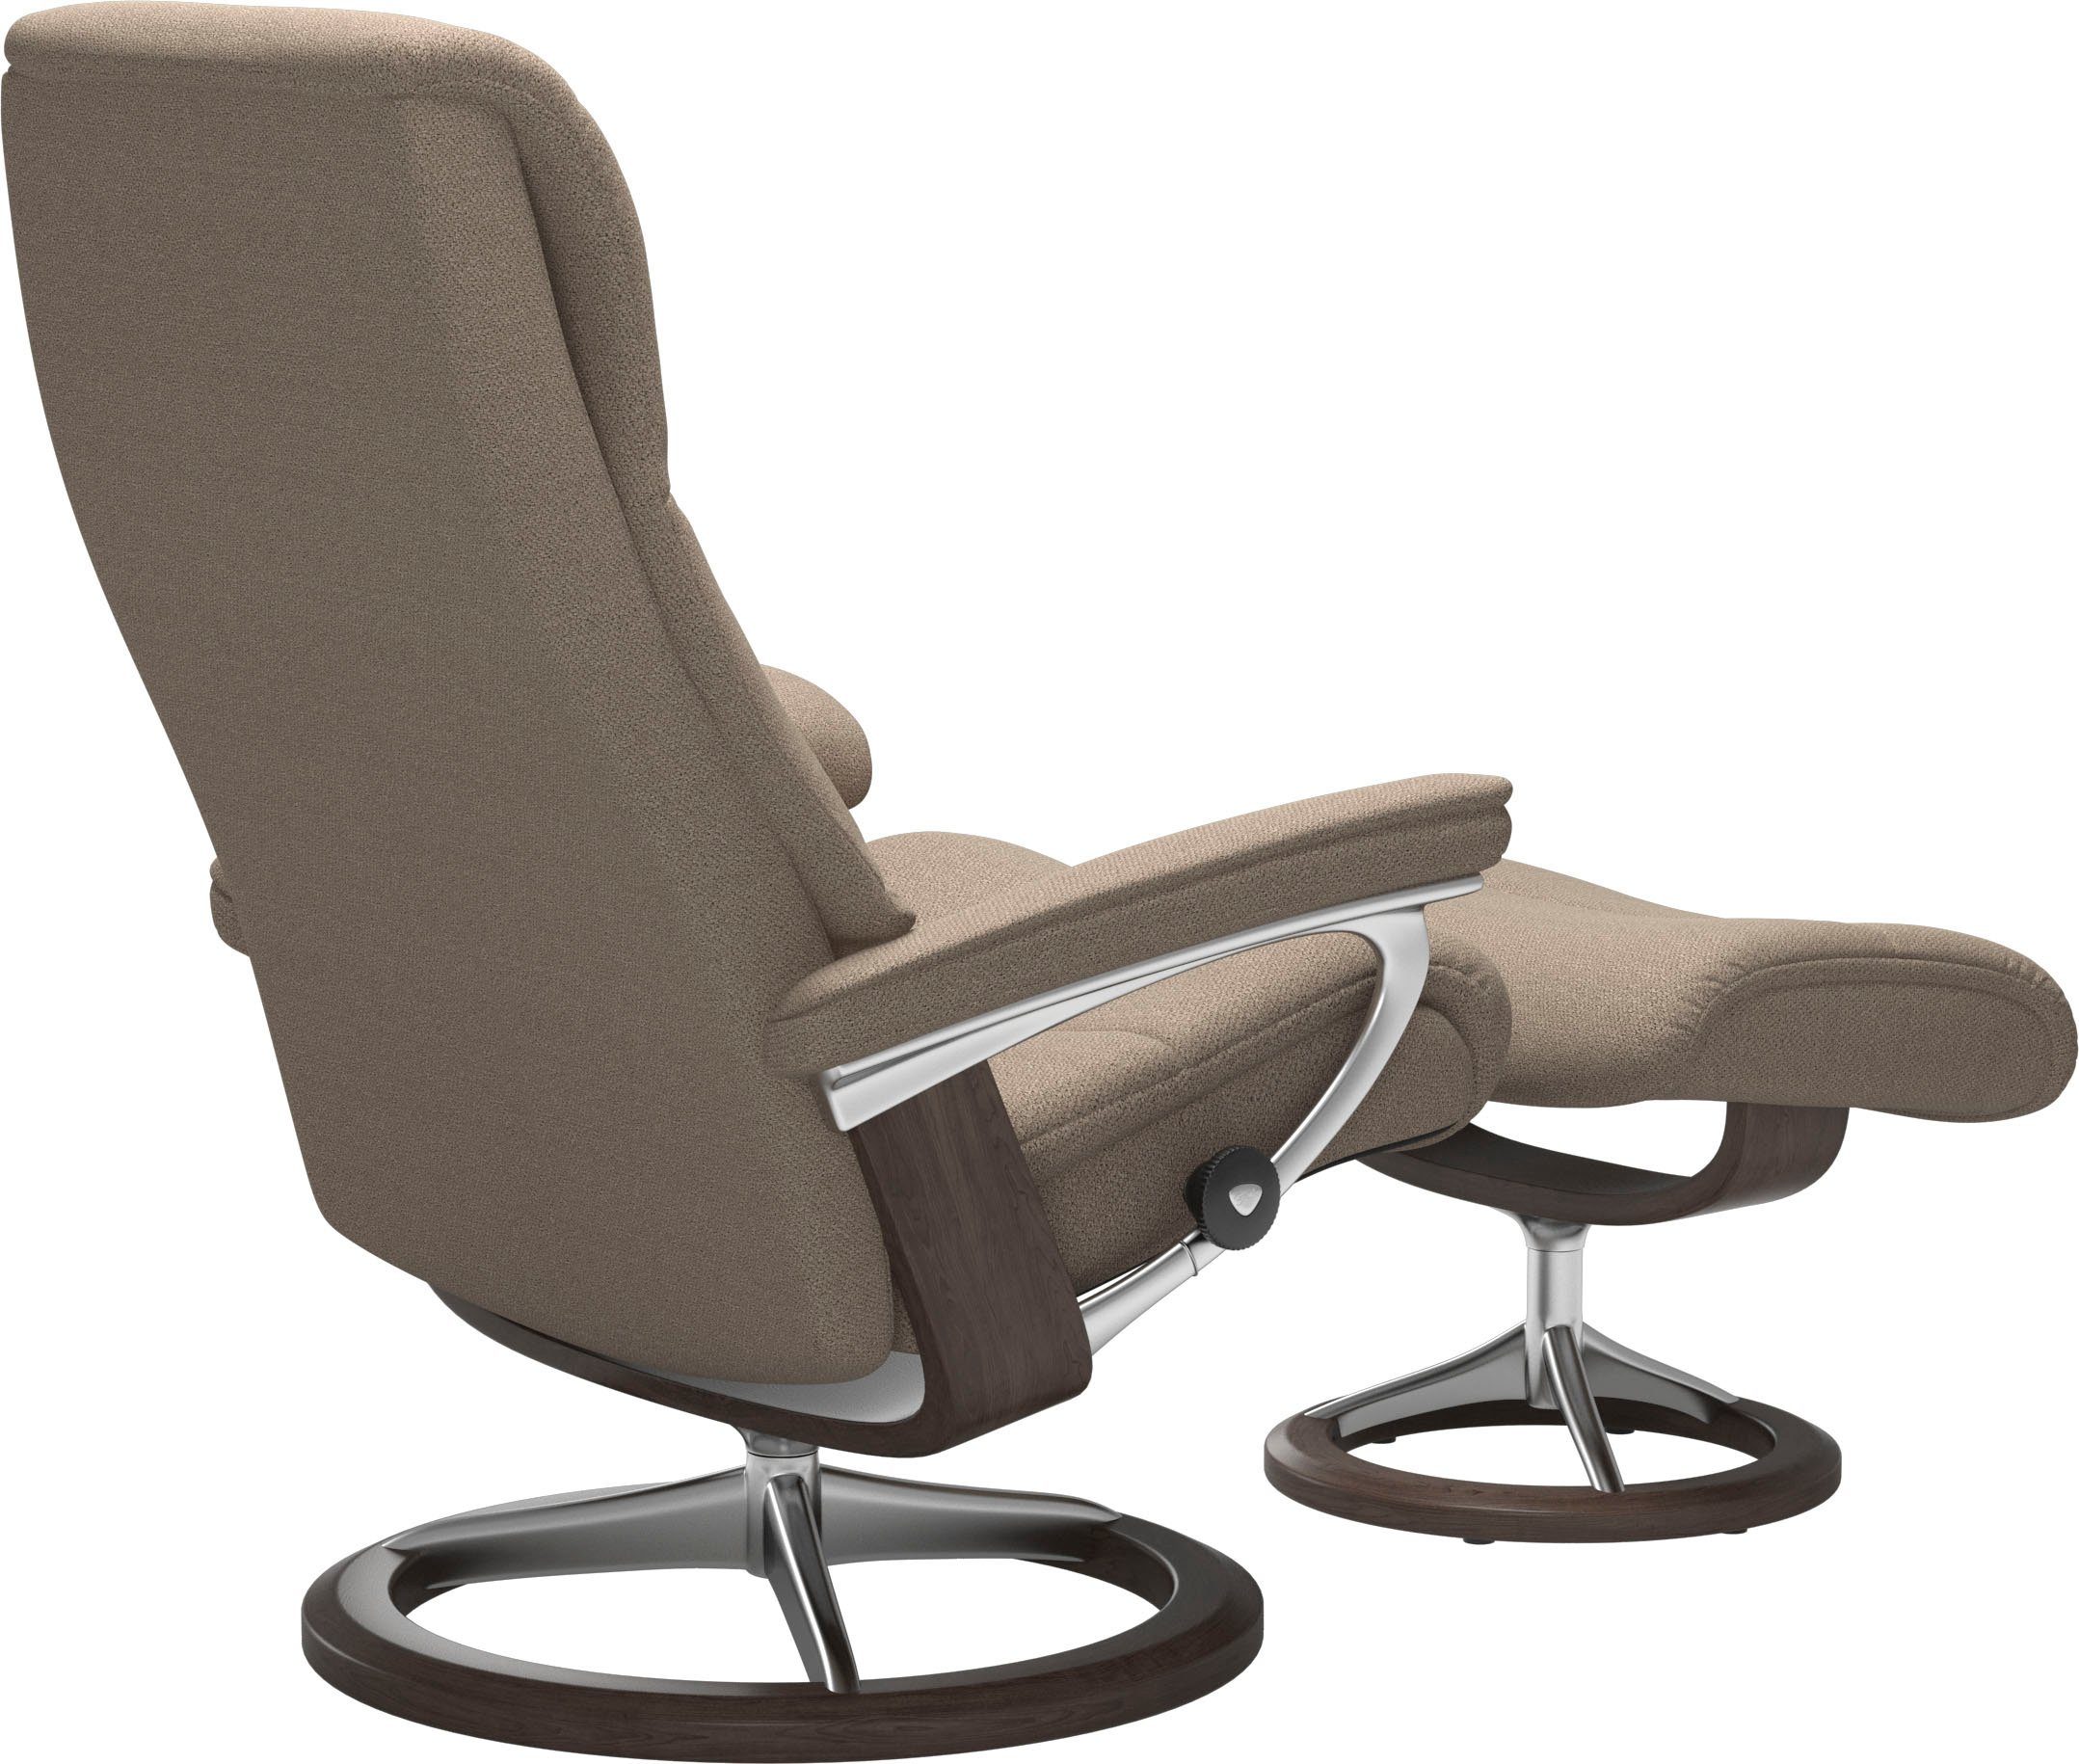 mit Größe Signature View, S,Gestell Wenge Relaxsessel Stressless® Base,